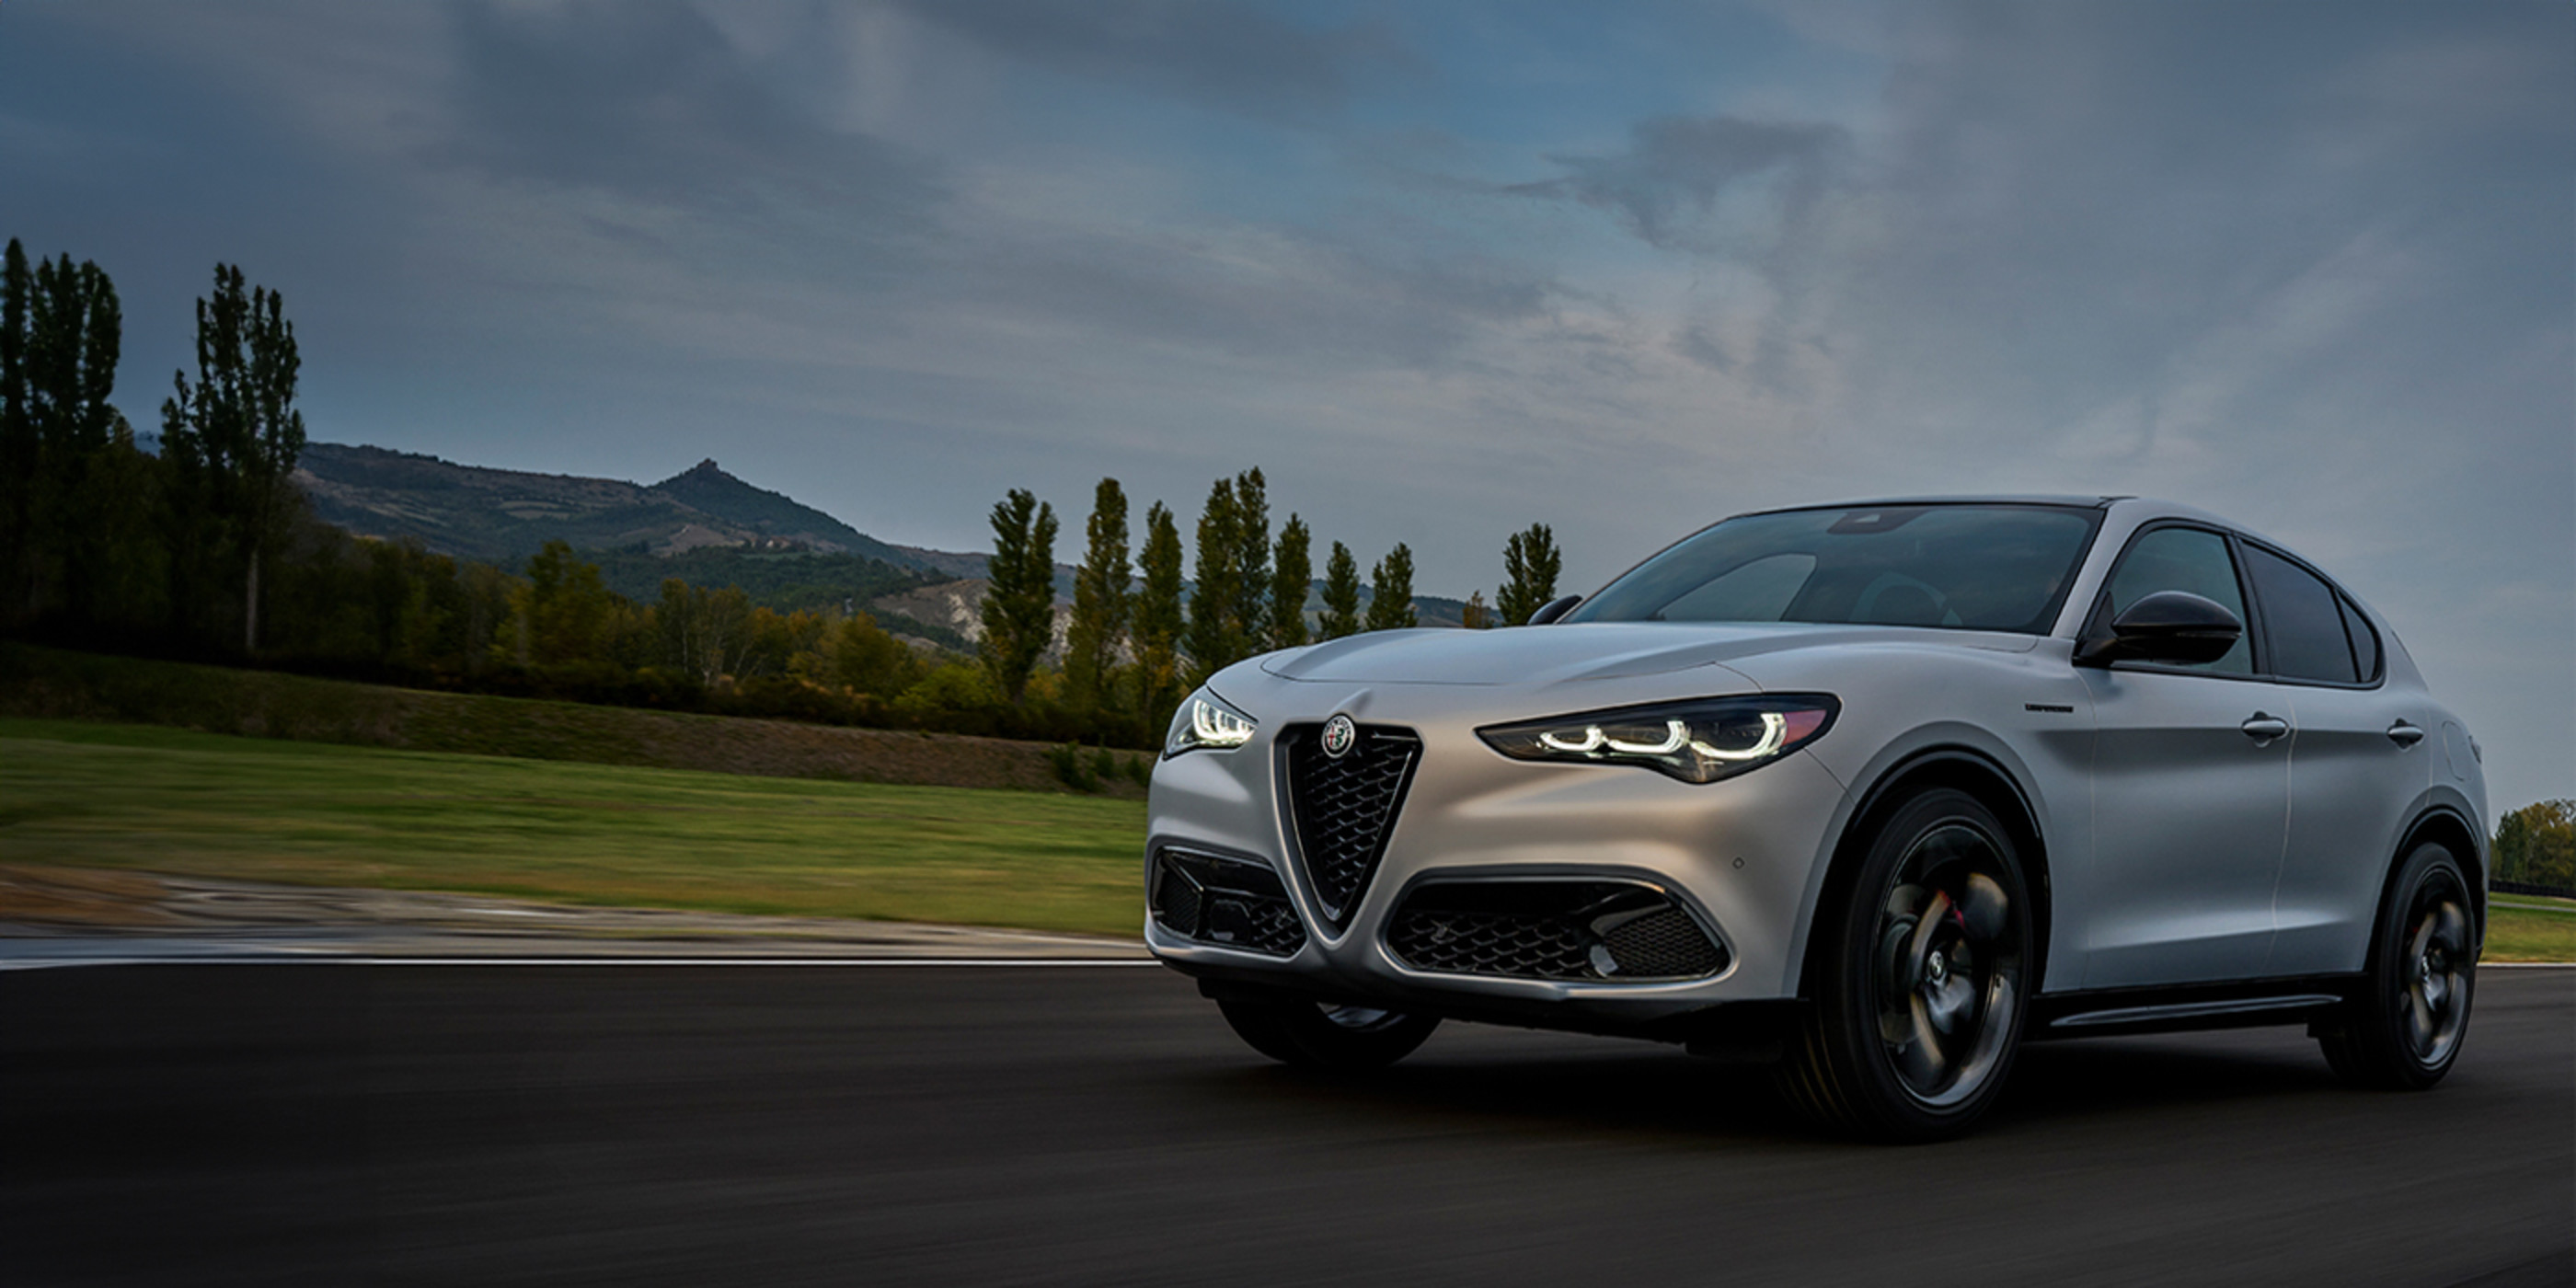 A front angled view of a silver 2024 Alfa Romeo Stelvio driving on a paved road with trees shown behind.